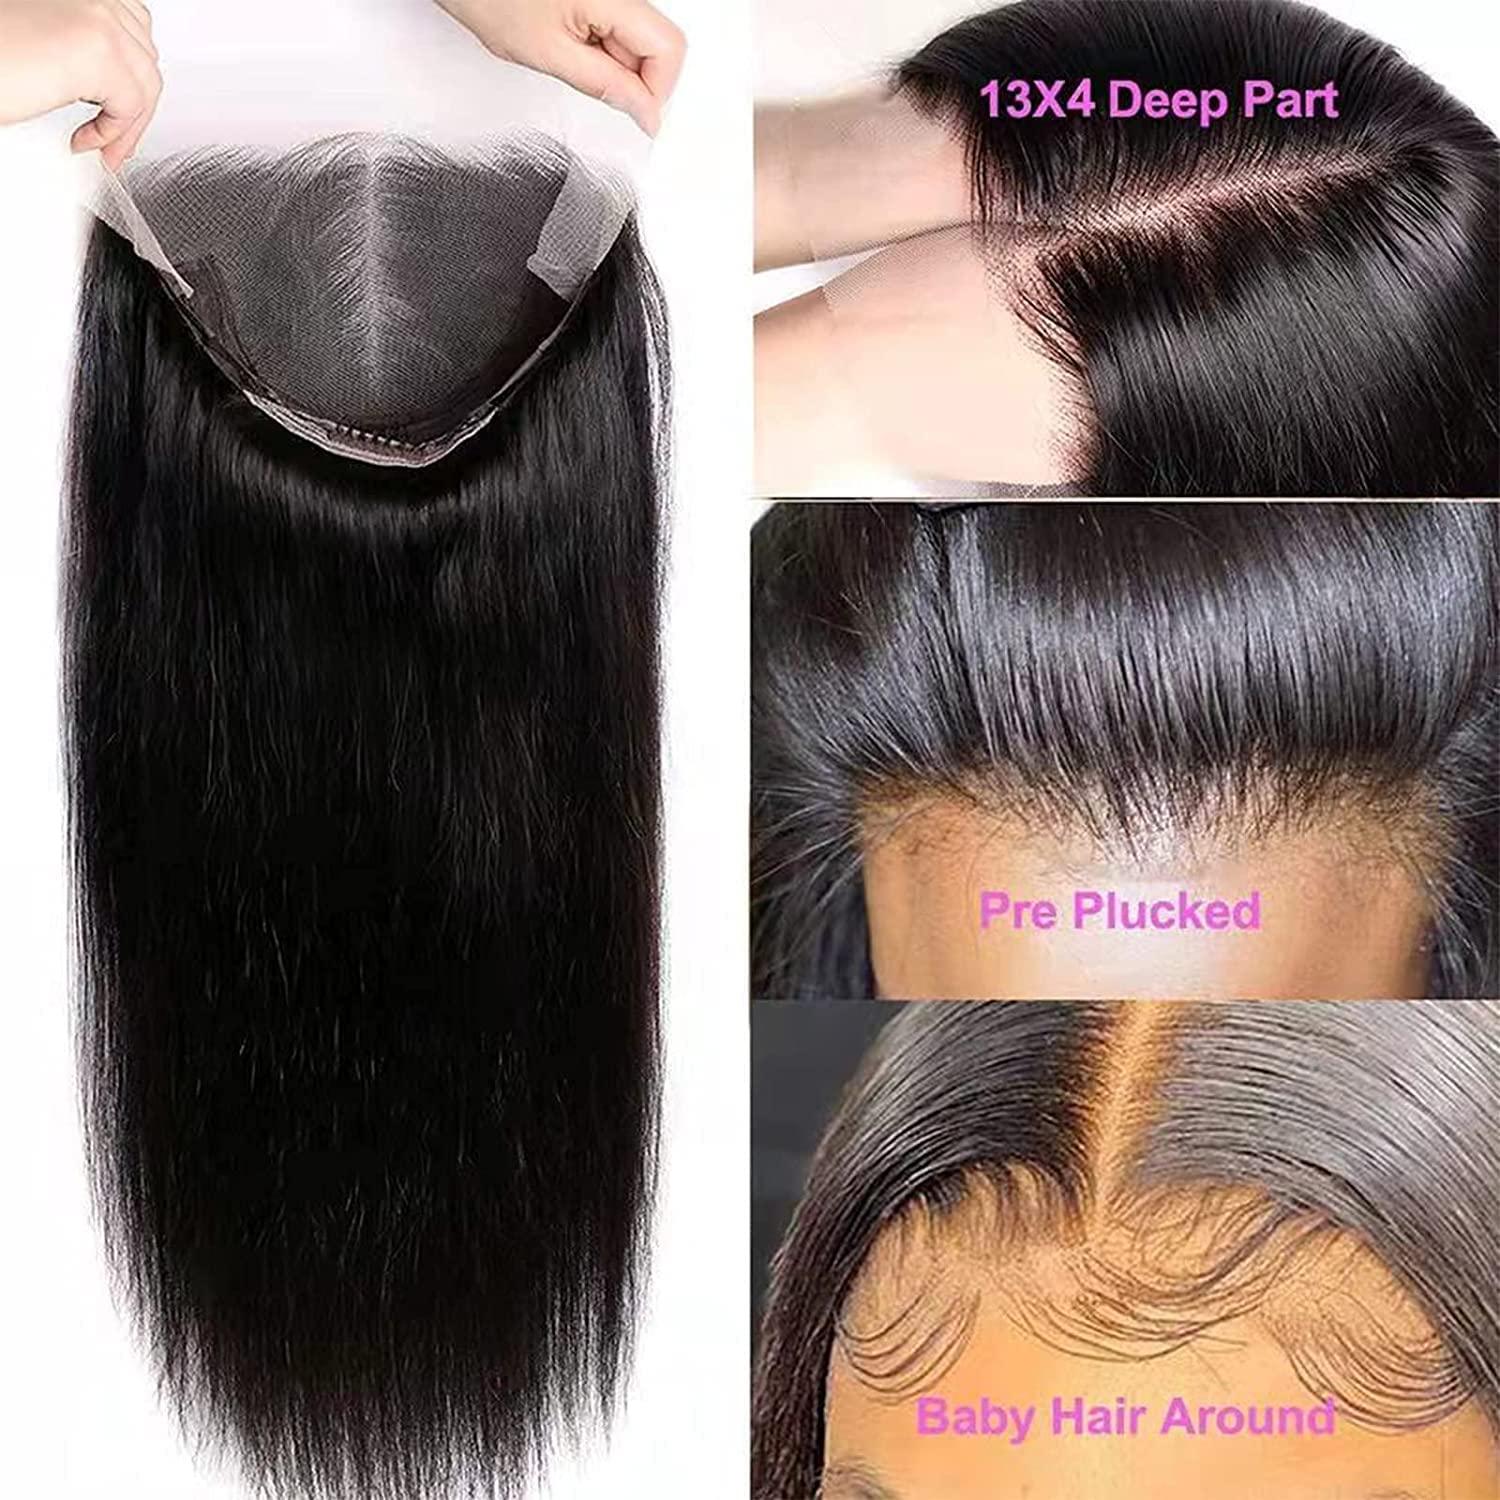 RESHOWBEAUTY Lace Front Wigs Human Hair Straight Human Hair 13x4